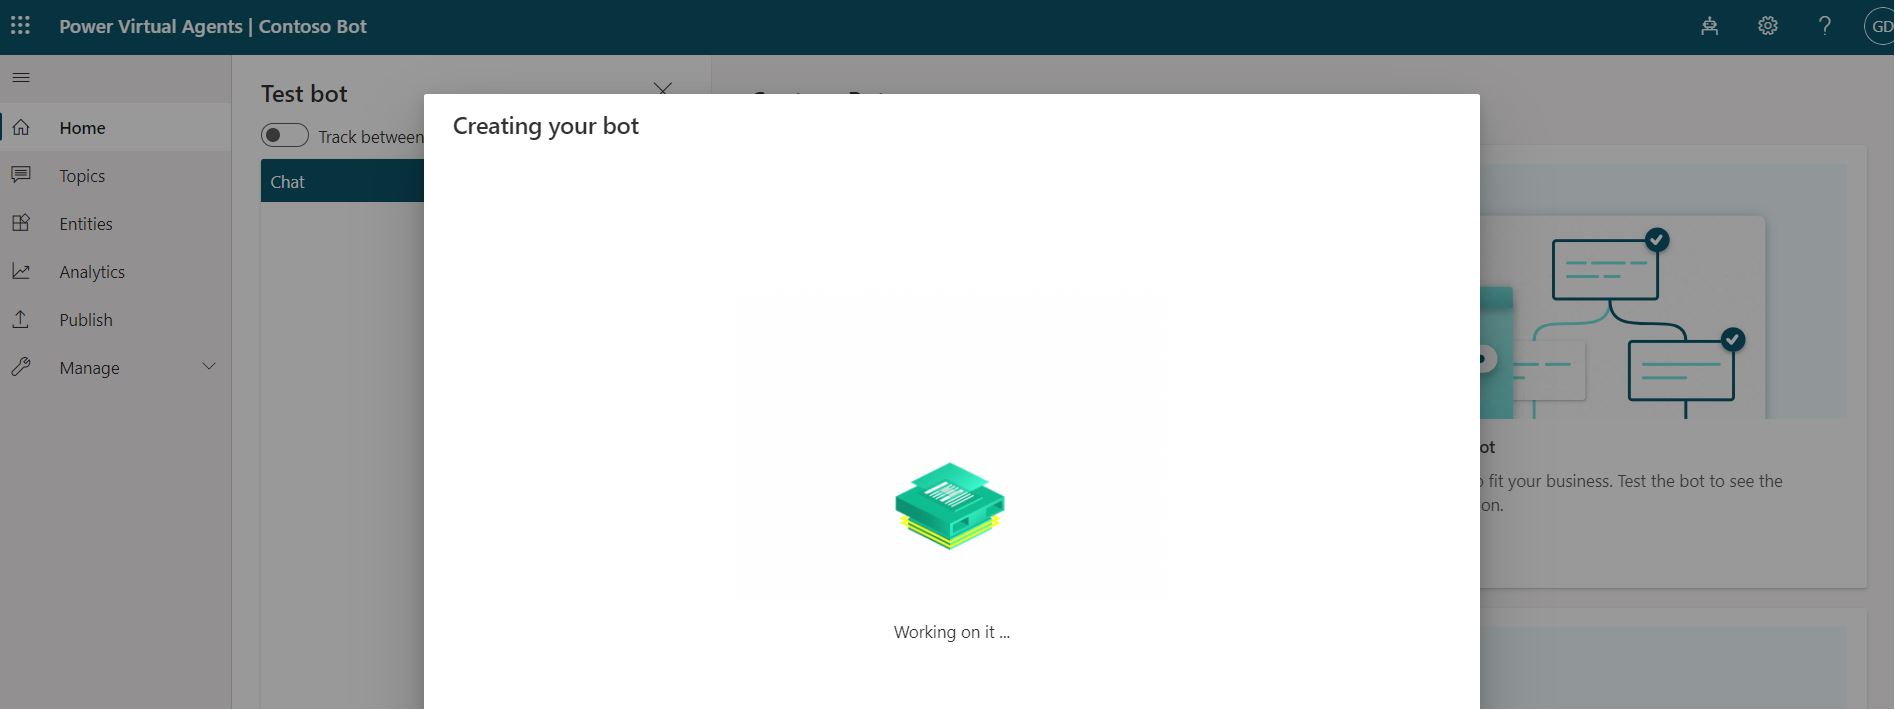 Creating chatbot in process status